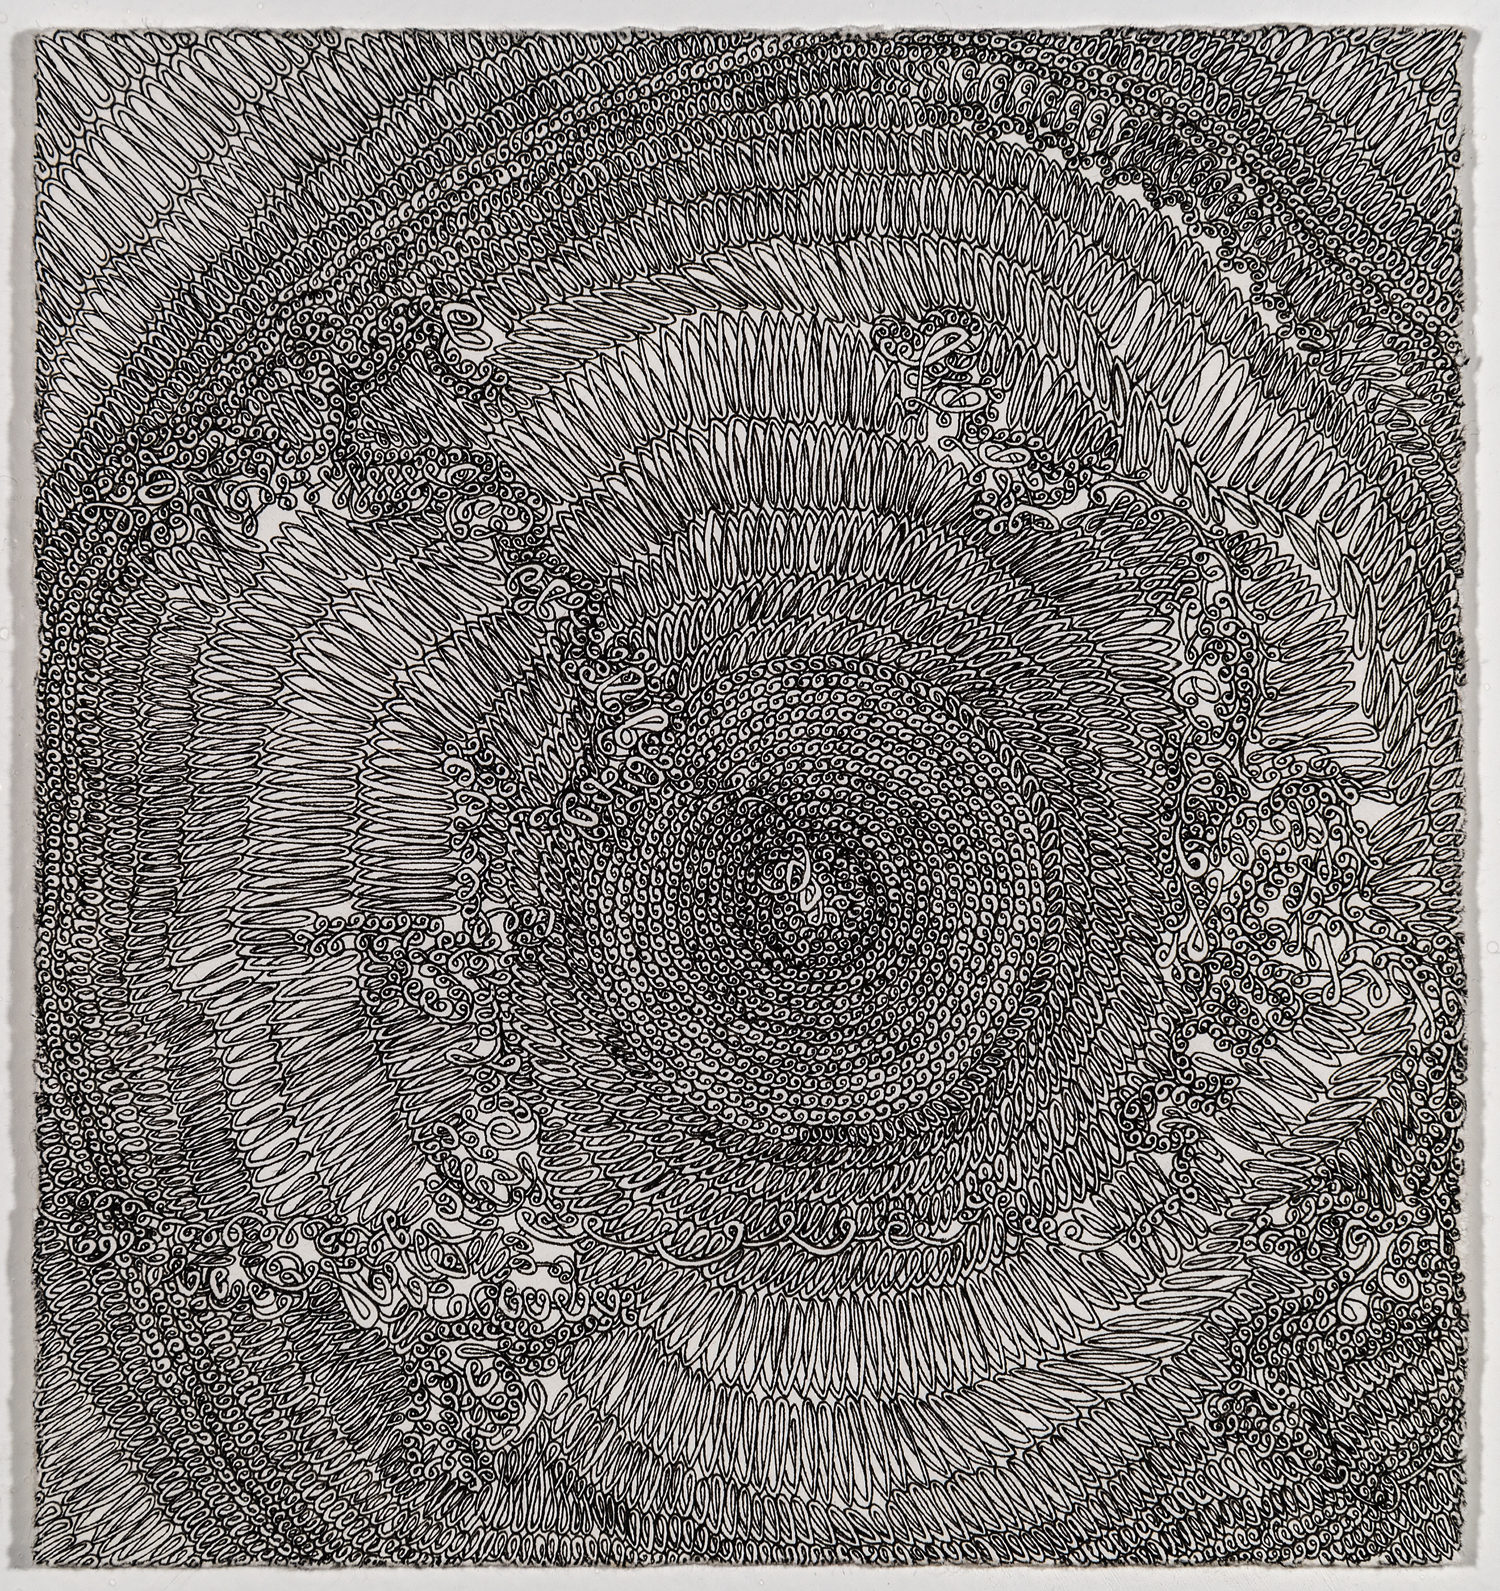 Atlas Cedarwood, ink on paper, 6 x 5.5 inches, 2015